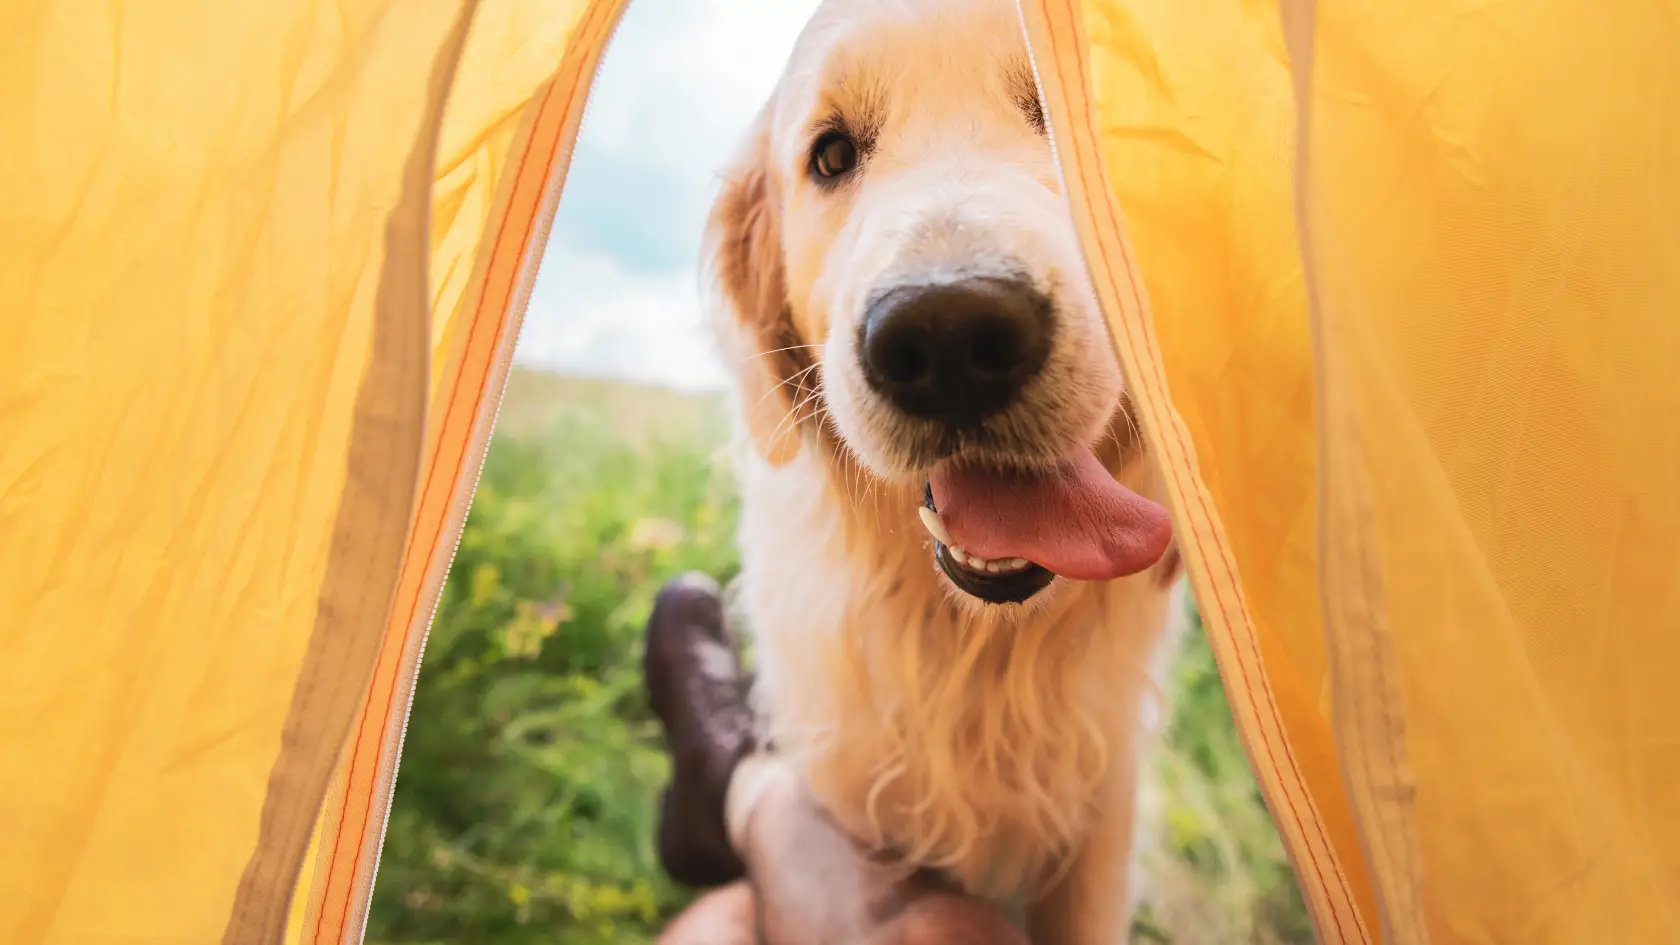 Camping with a dog that has digestive issues